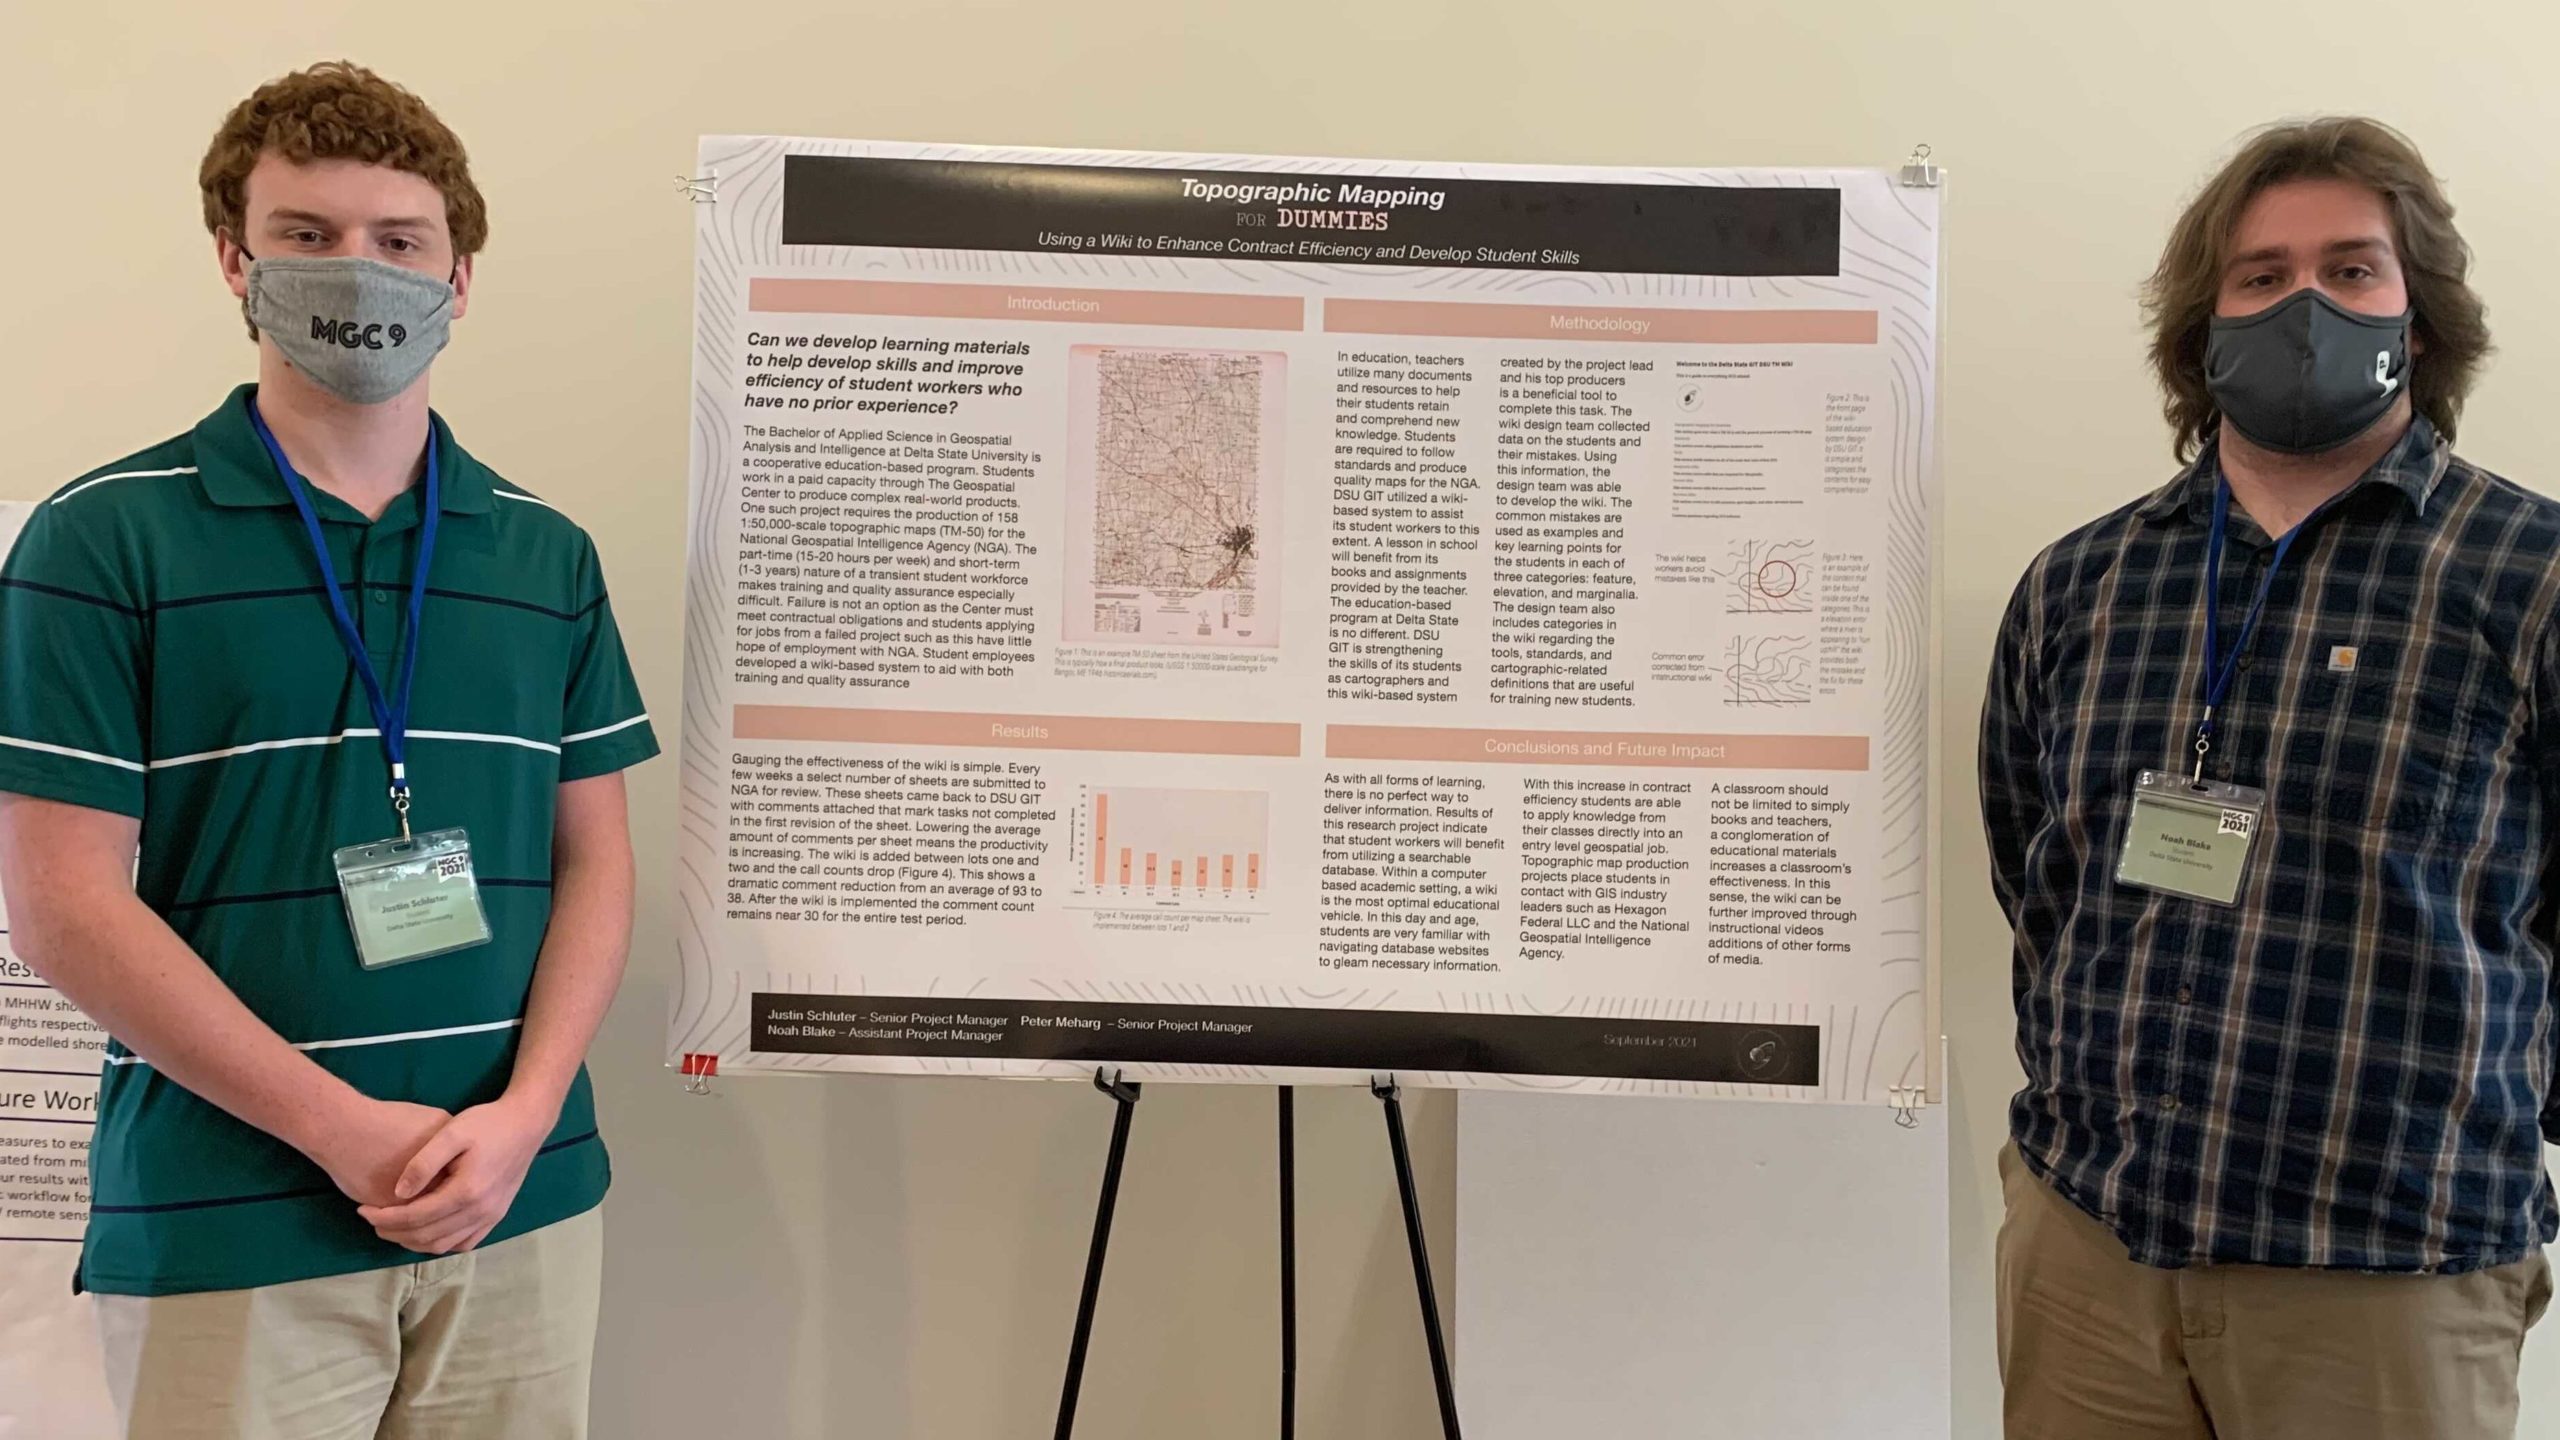 Justin Schluter stands to the left of a poster titled "Topographic Mapping for Dummies Using a Wiki to Enhance Contract Efficiency and Develop Student Skills as Topographic Map Makers". On the right is Noah Blake.